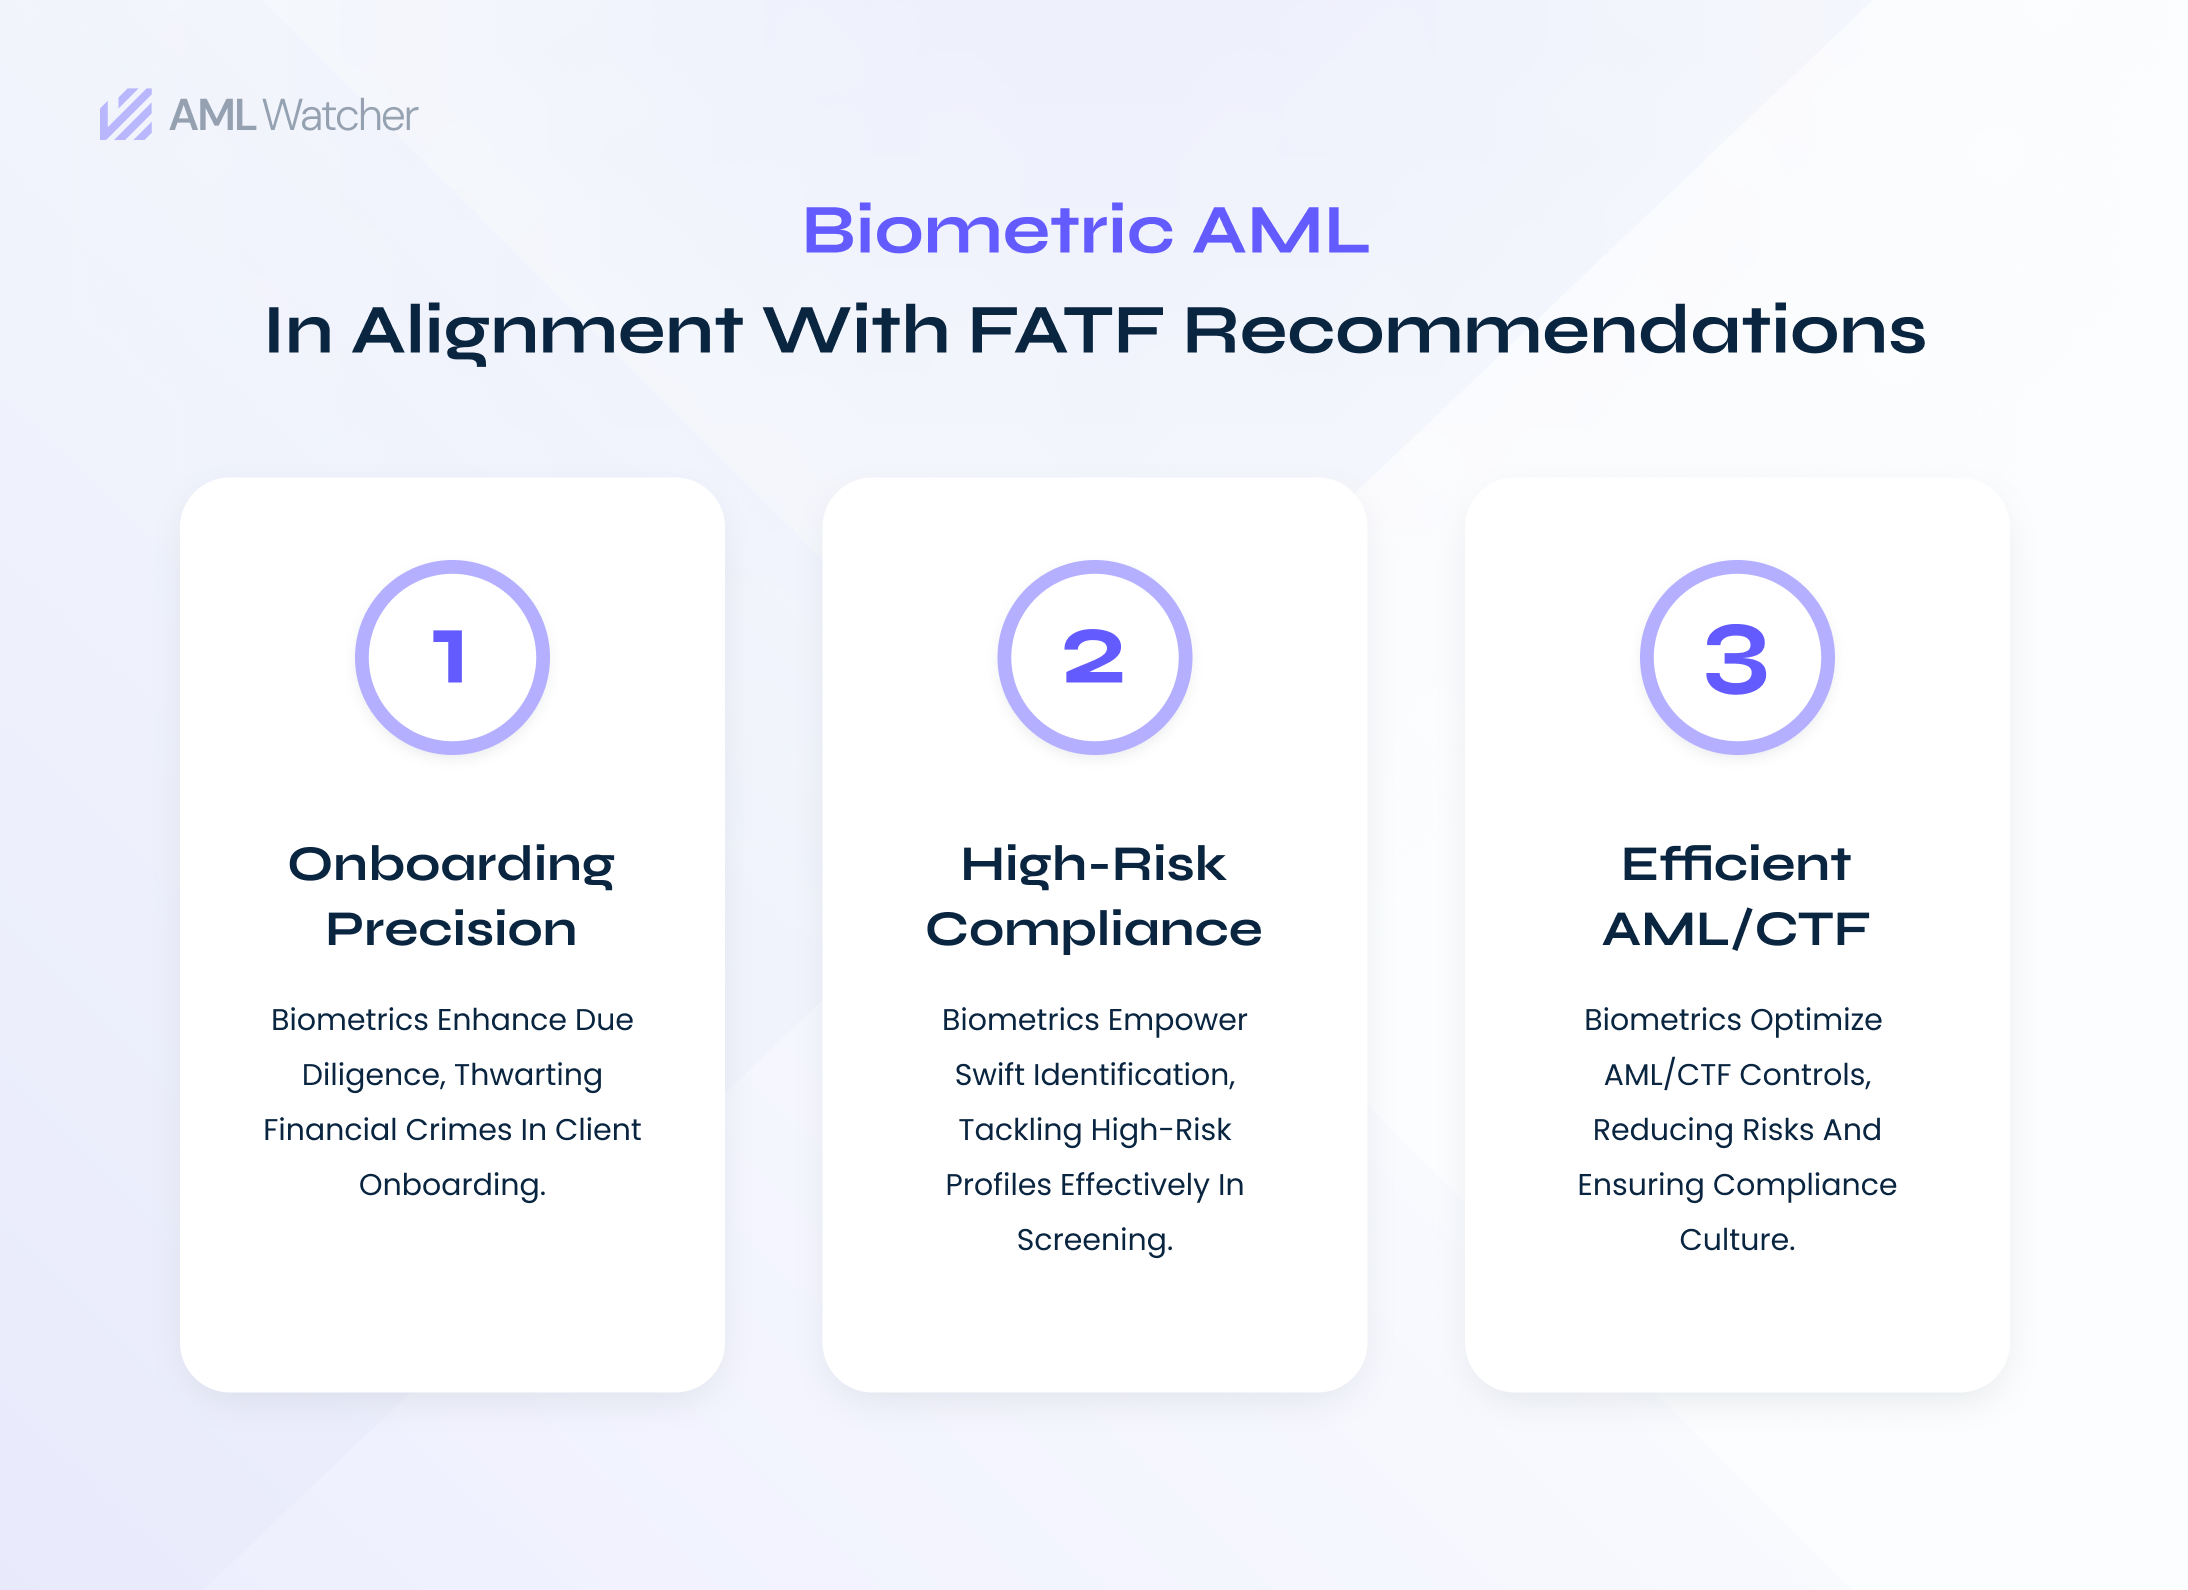 the image explains how biometric AML is aligned with the FATF regulations in meeting compliance goals. It includes the compliance requirements of onboarding & customer due diligence, compliance against high-risk profiles, and enhanced AML/CFT controls. 